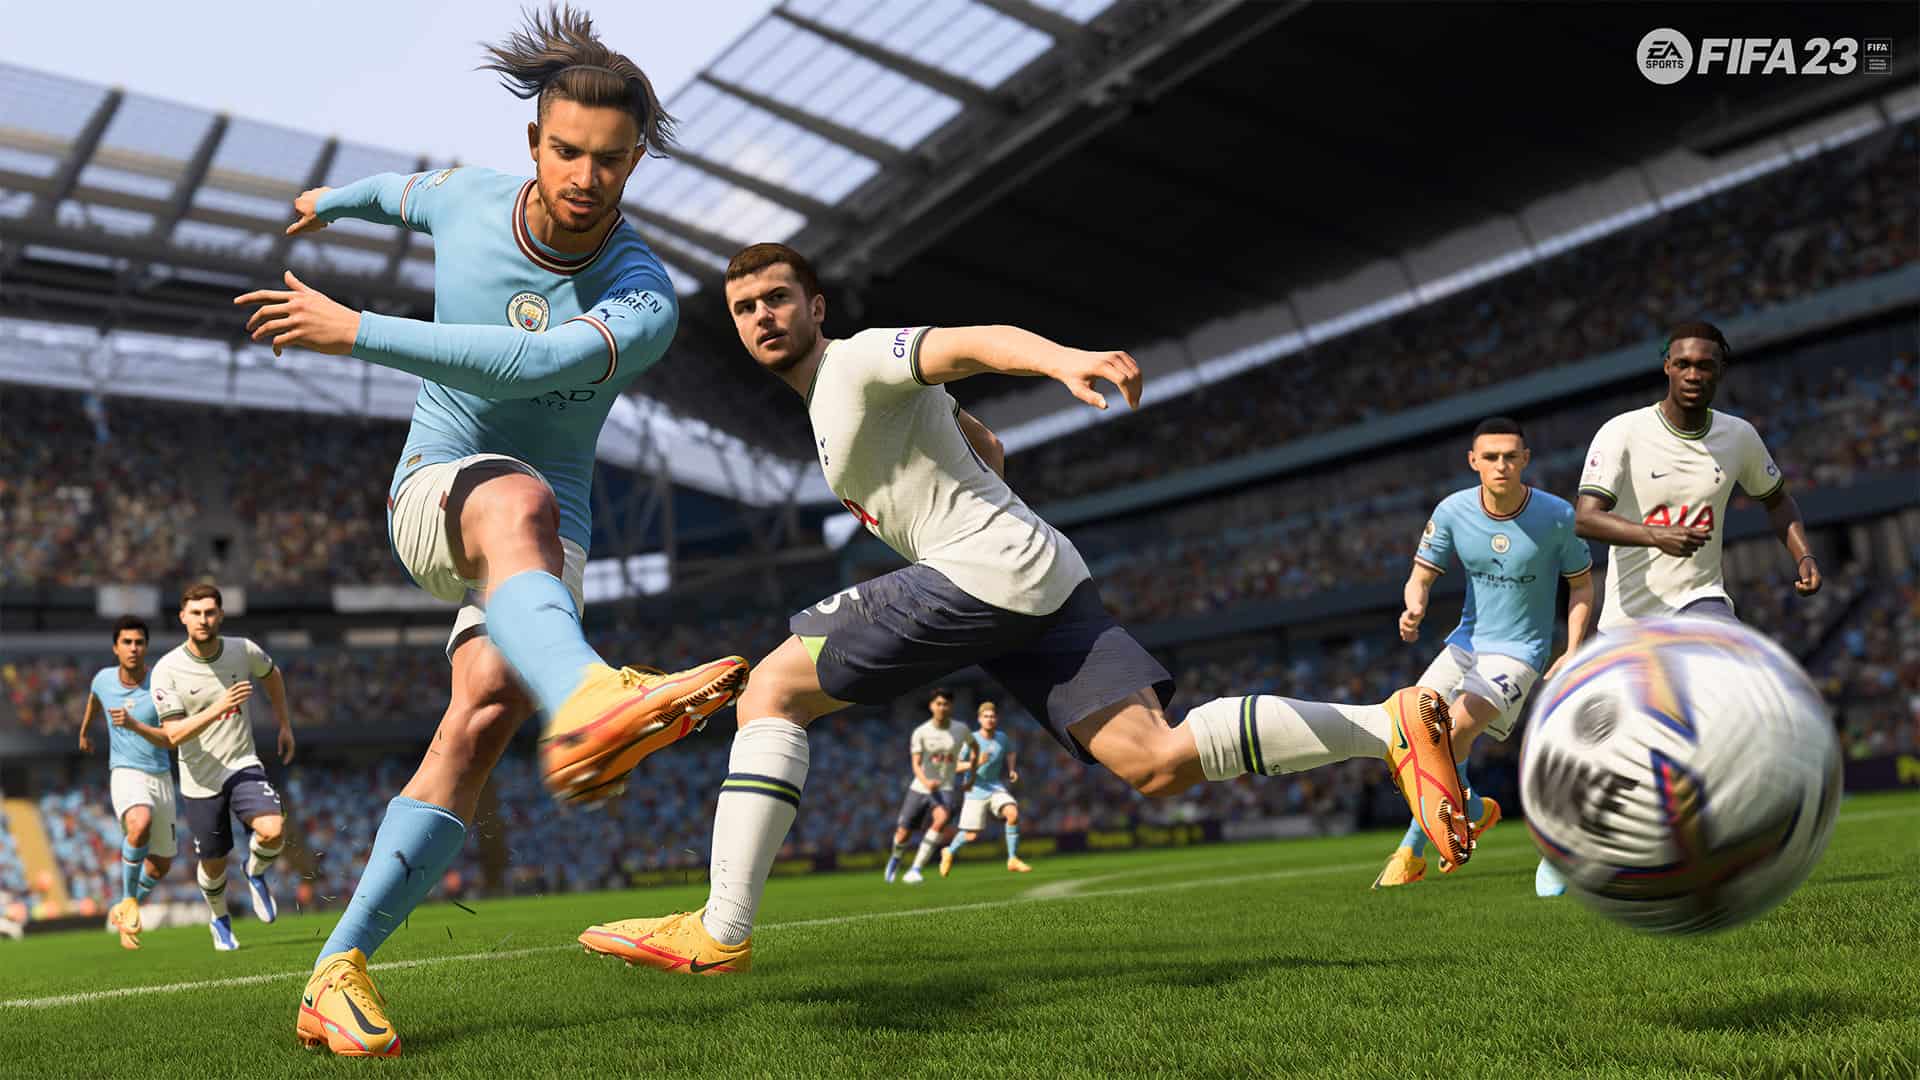 FIFA 23 beta wave 2 – will there be another beta?